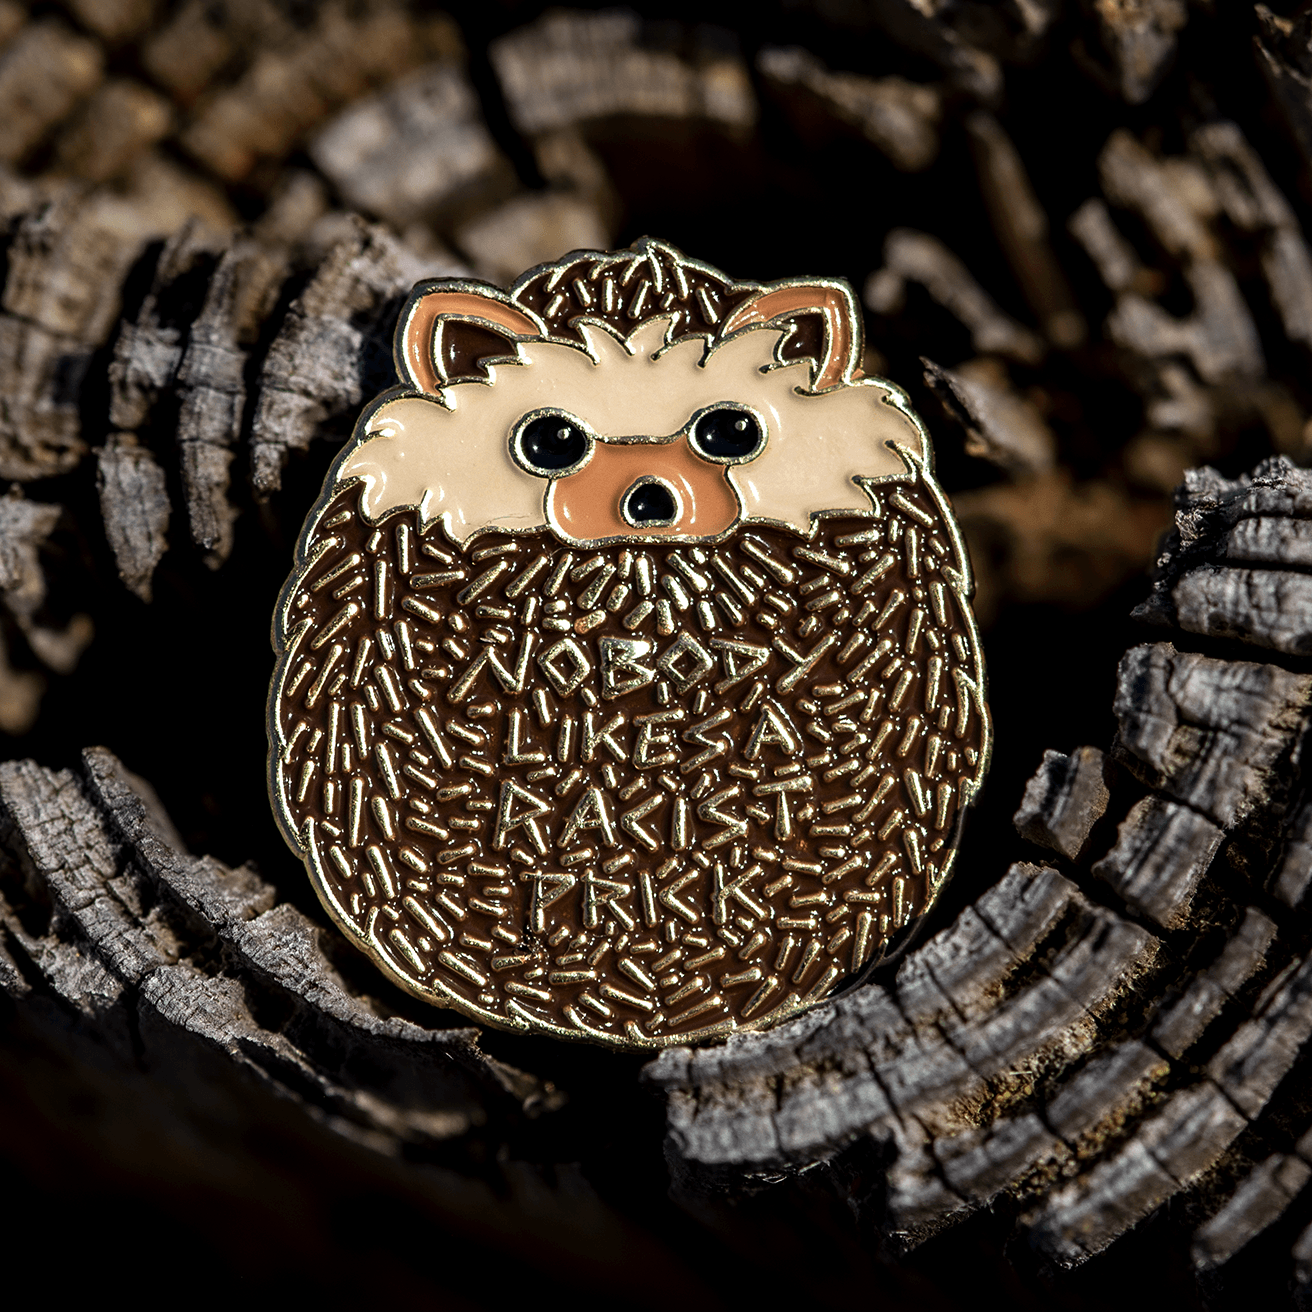 “Nobody Likes a Racist Prick" Hedgehog Pin by The Roving House